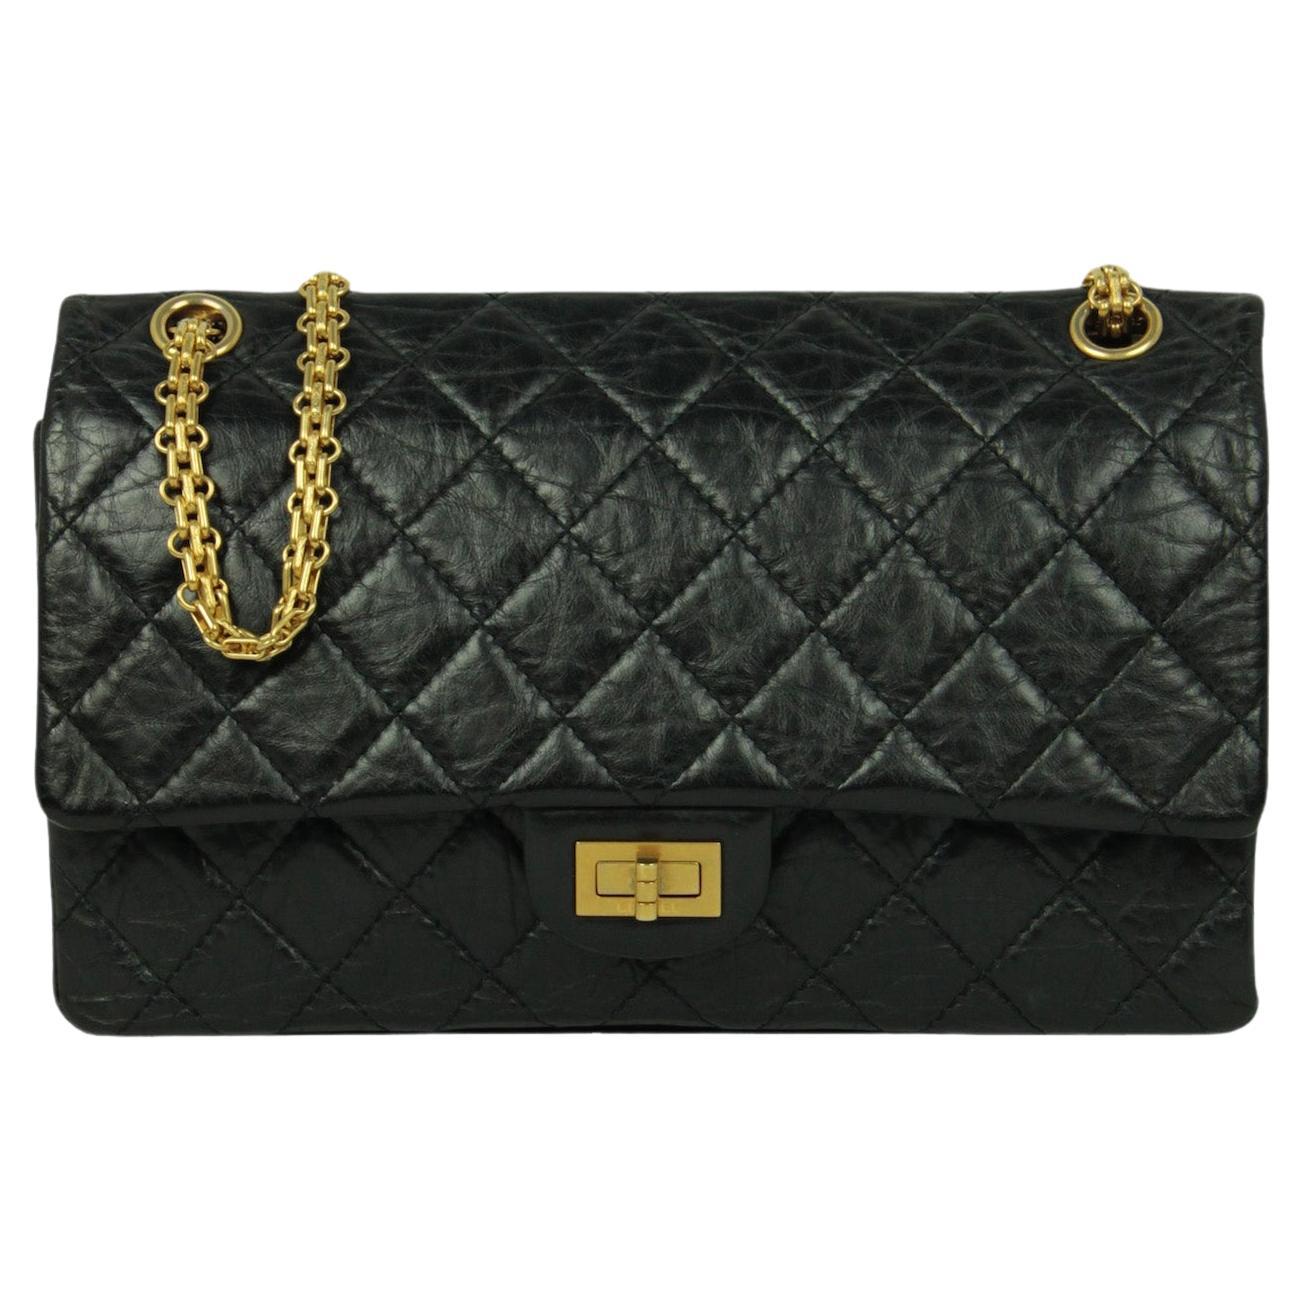 Chanel Black Calfskin Leather Quilted 2.55 Reissue 226 Flap Bag For Sale